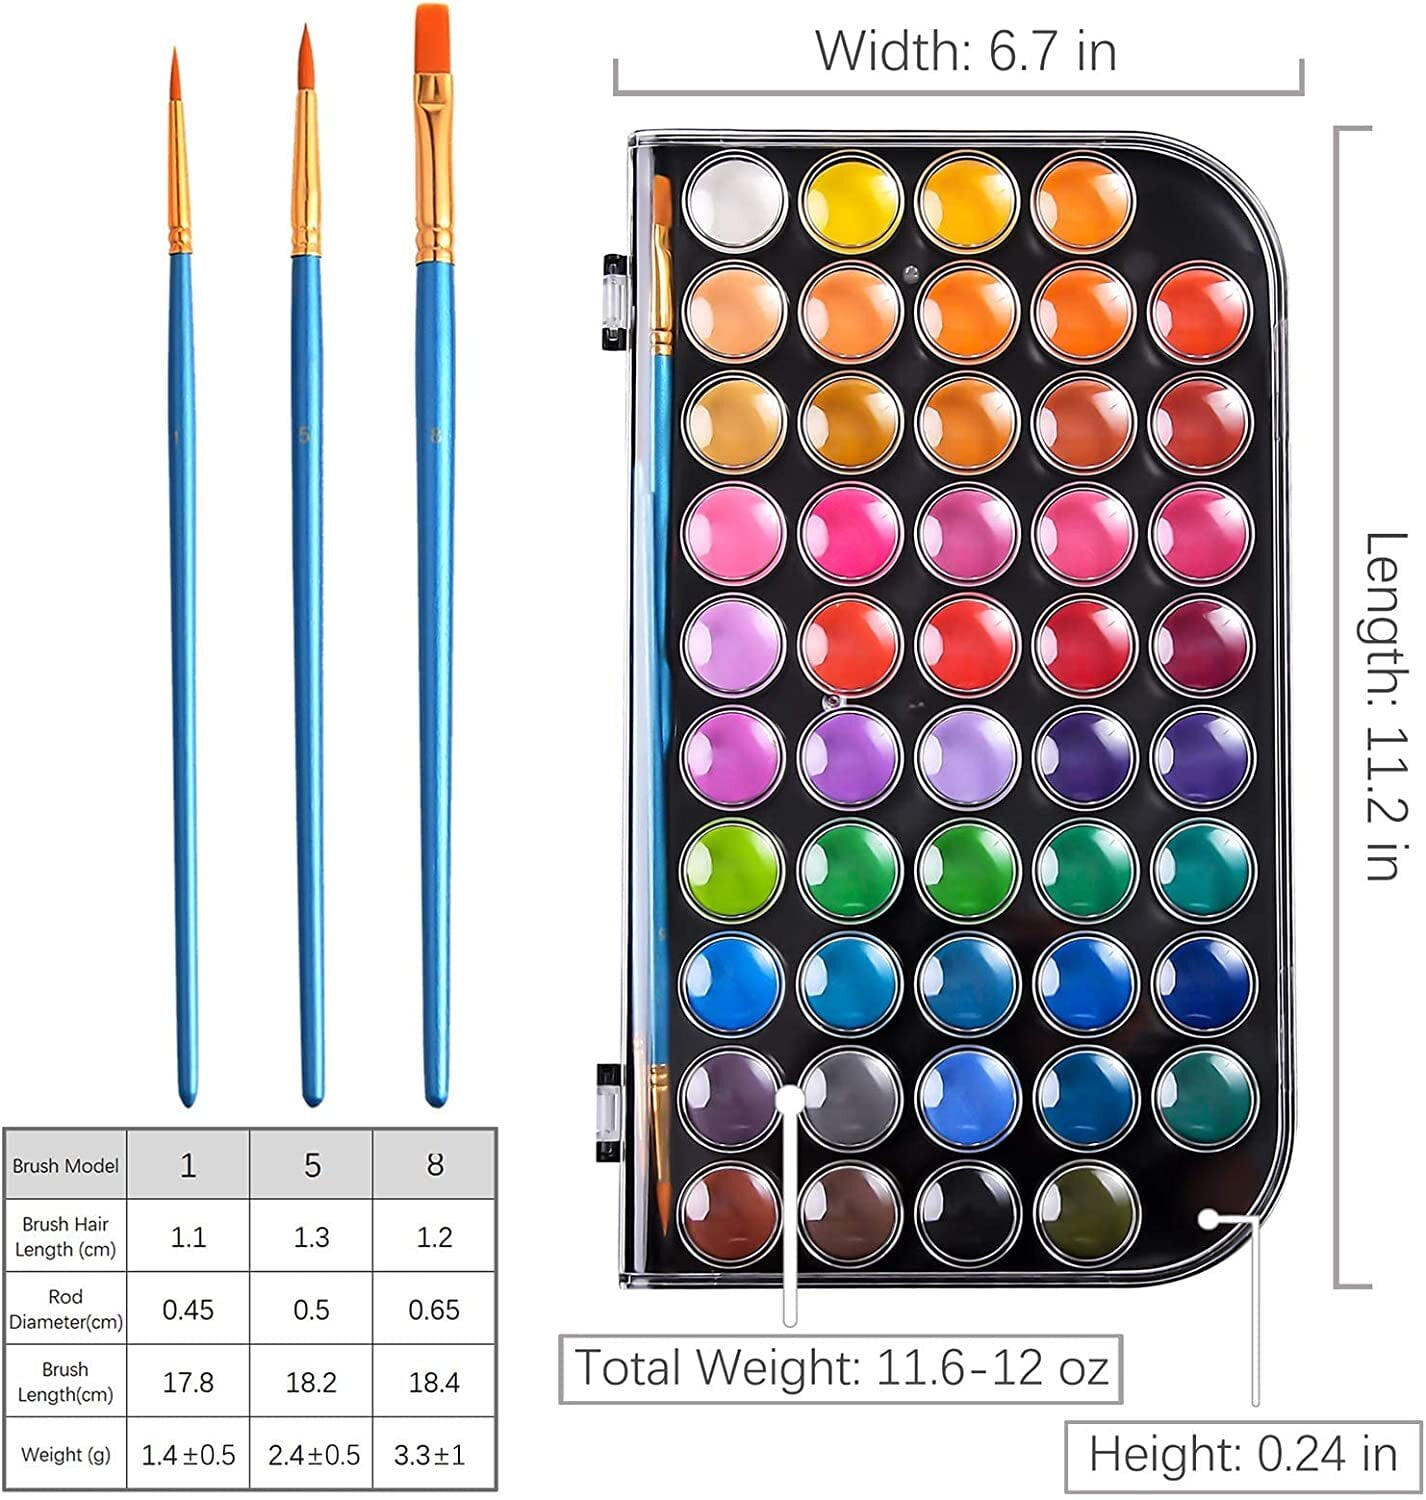 Watercolor Paint Set- Premium 48 Watercolor Paint. Water Color with  Watercolor Book, Watercolor Palette and 3 Paintbrushes. Great Water Colors  for